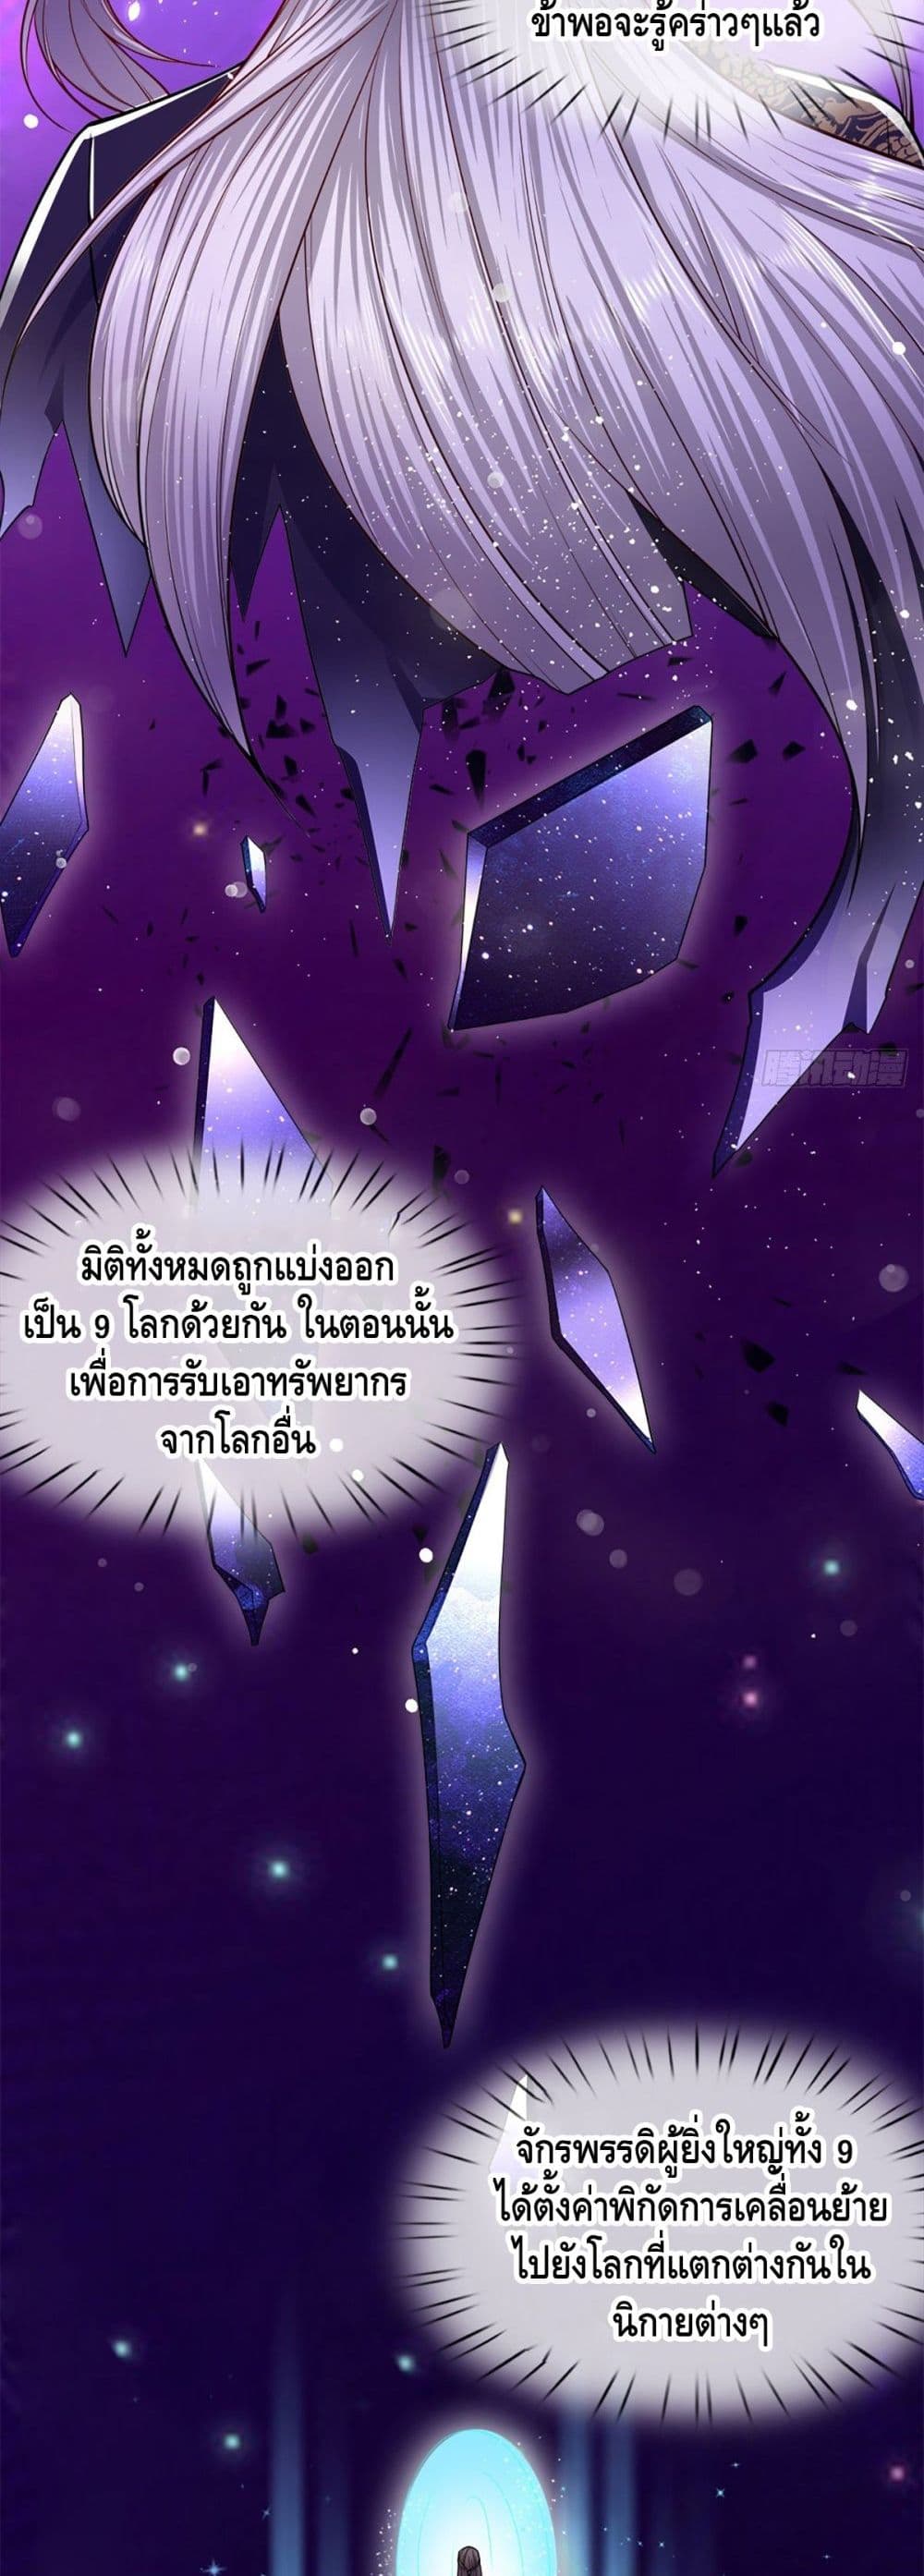 Disciples All Over the World à¸à¸­à¸à¸à¸µà¹ 63 (9)